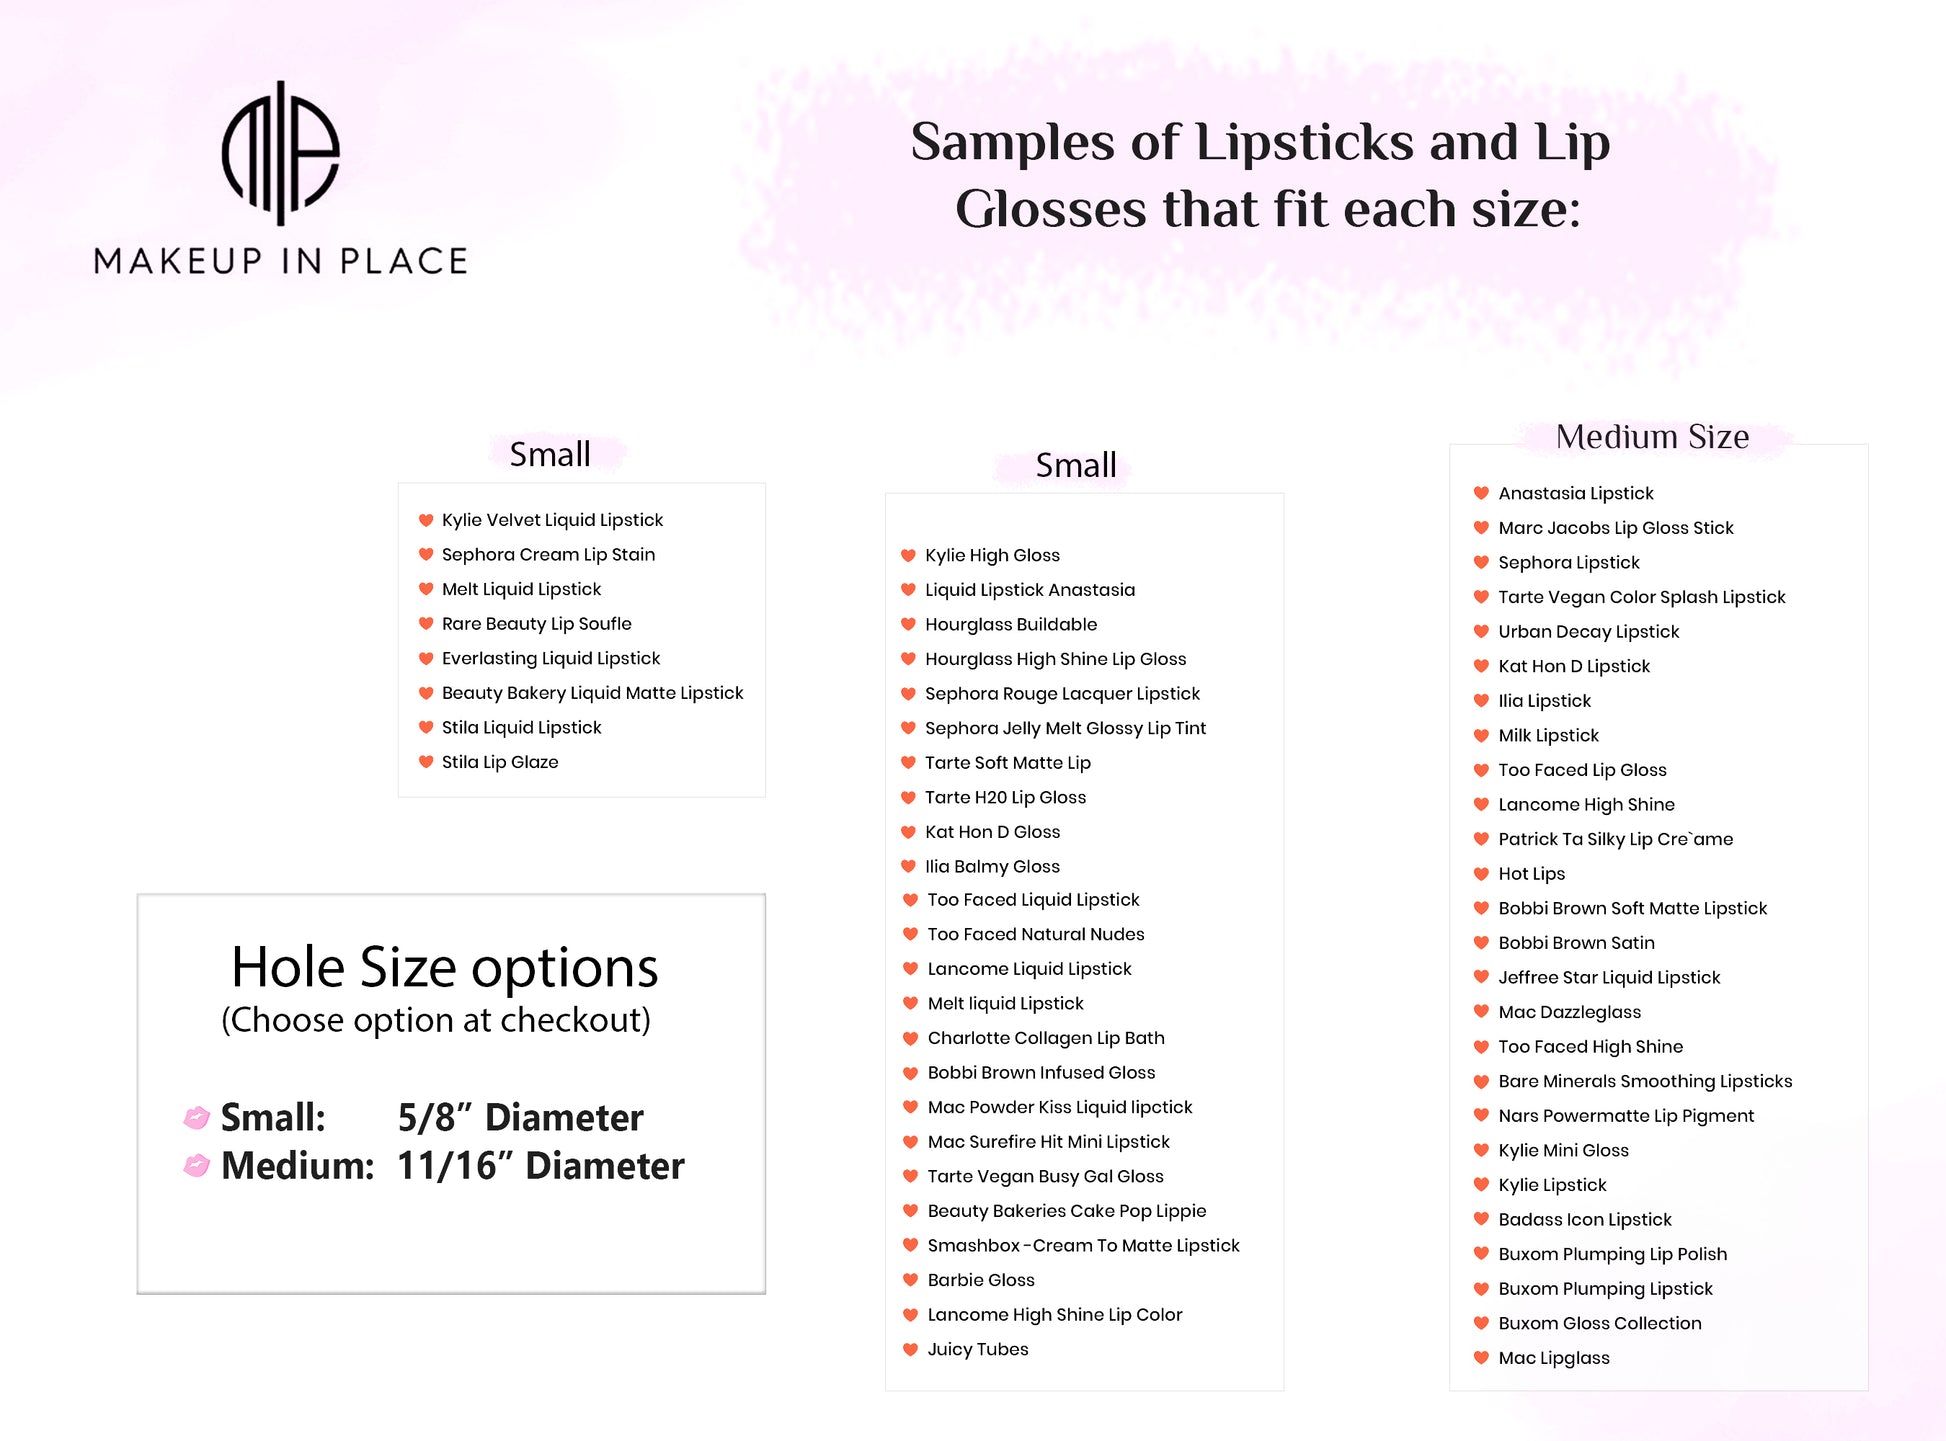 Samples of lipsticks and lip glosses that fit the wall mounted makeup organizer.